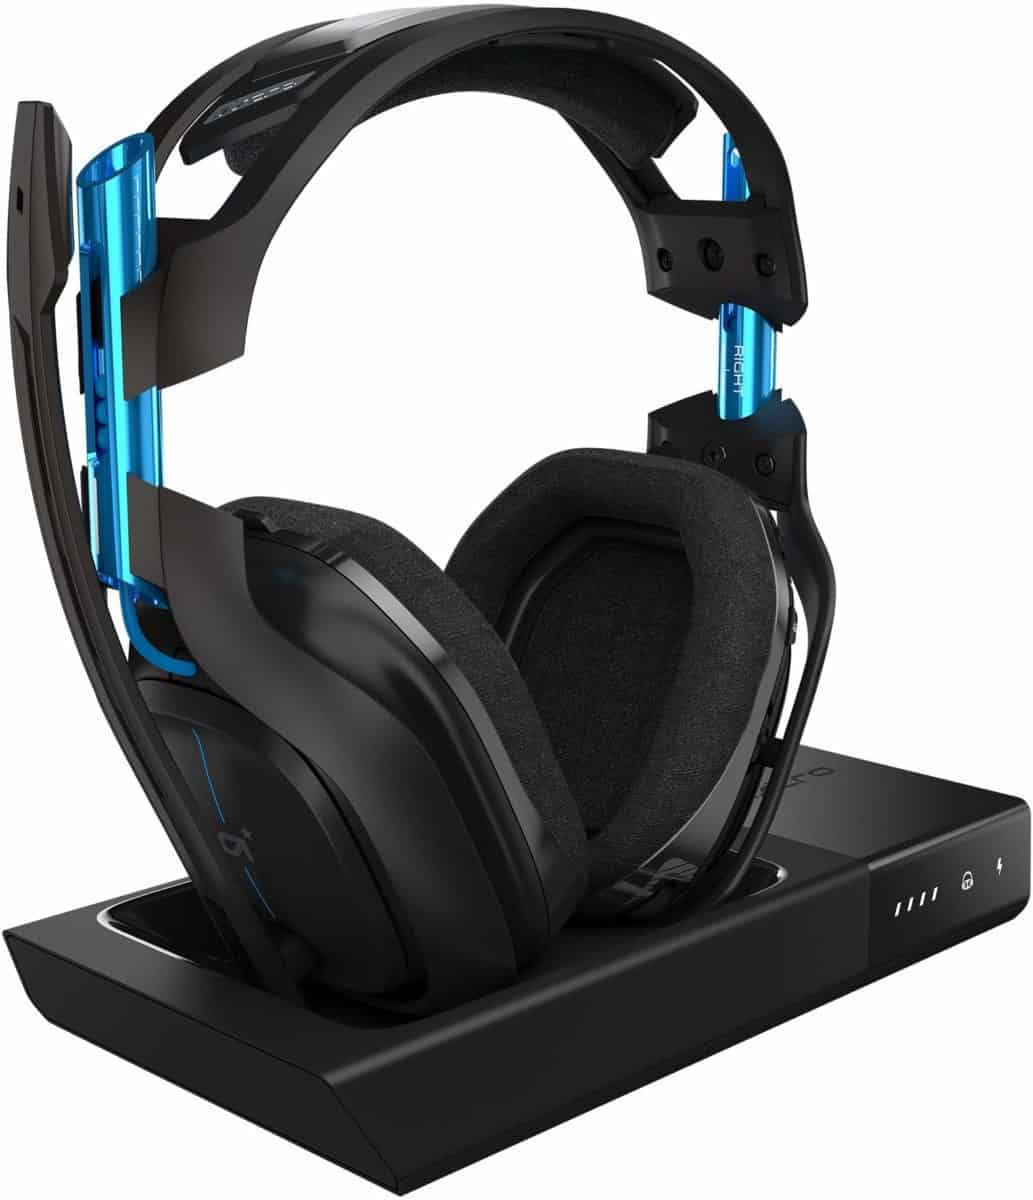 Astro gaming a50